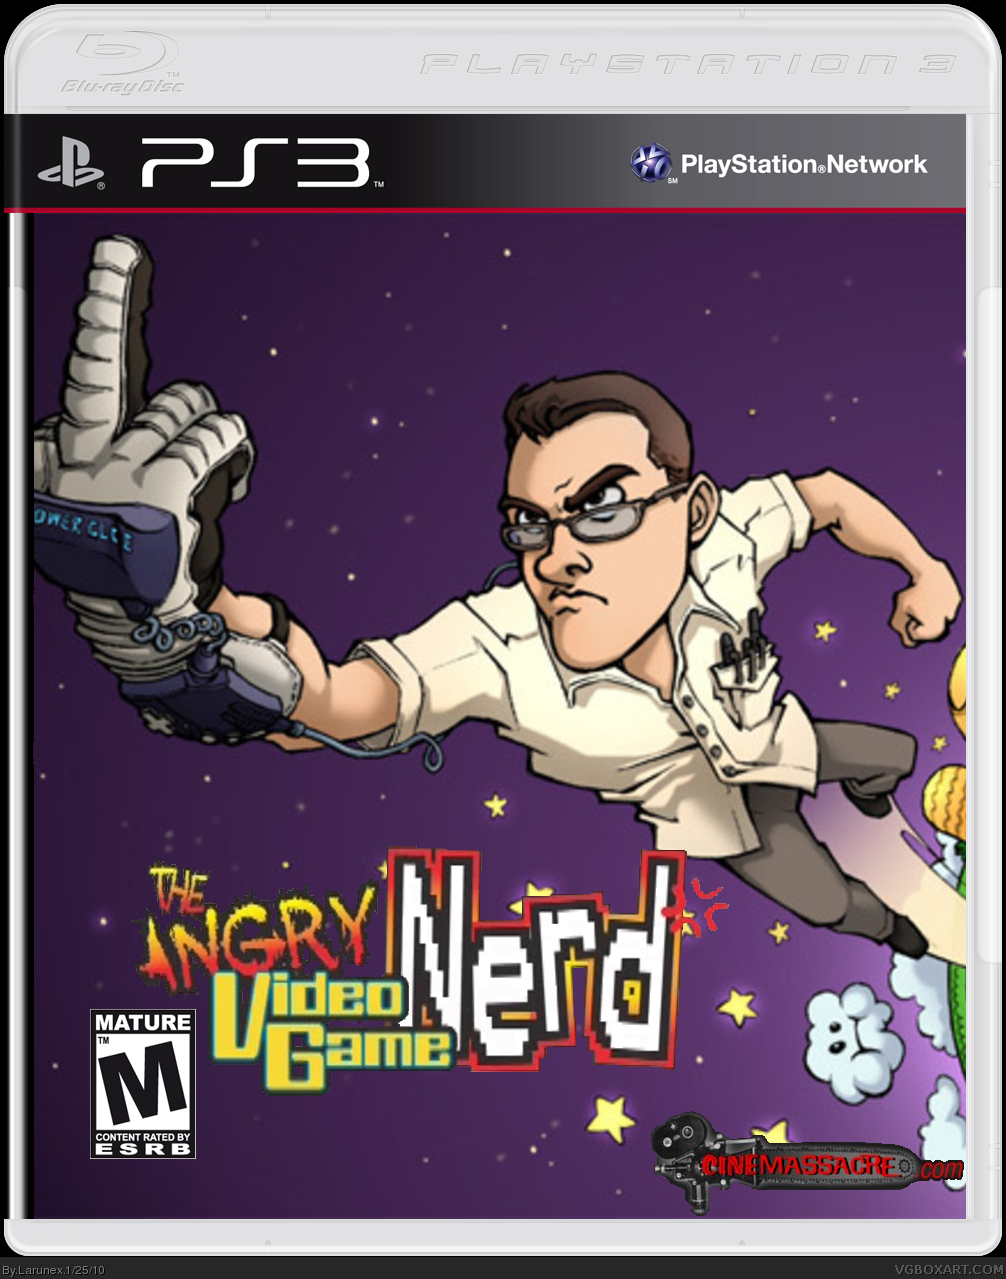 The Angry Video Game Nerd Game box cover